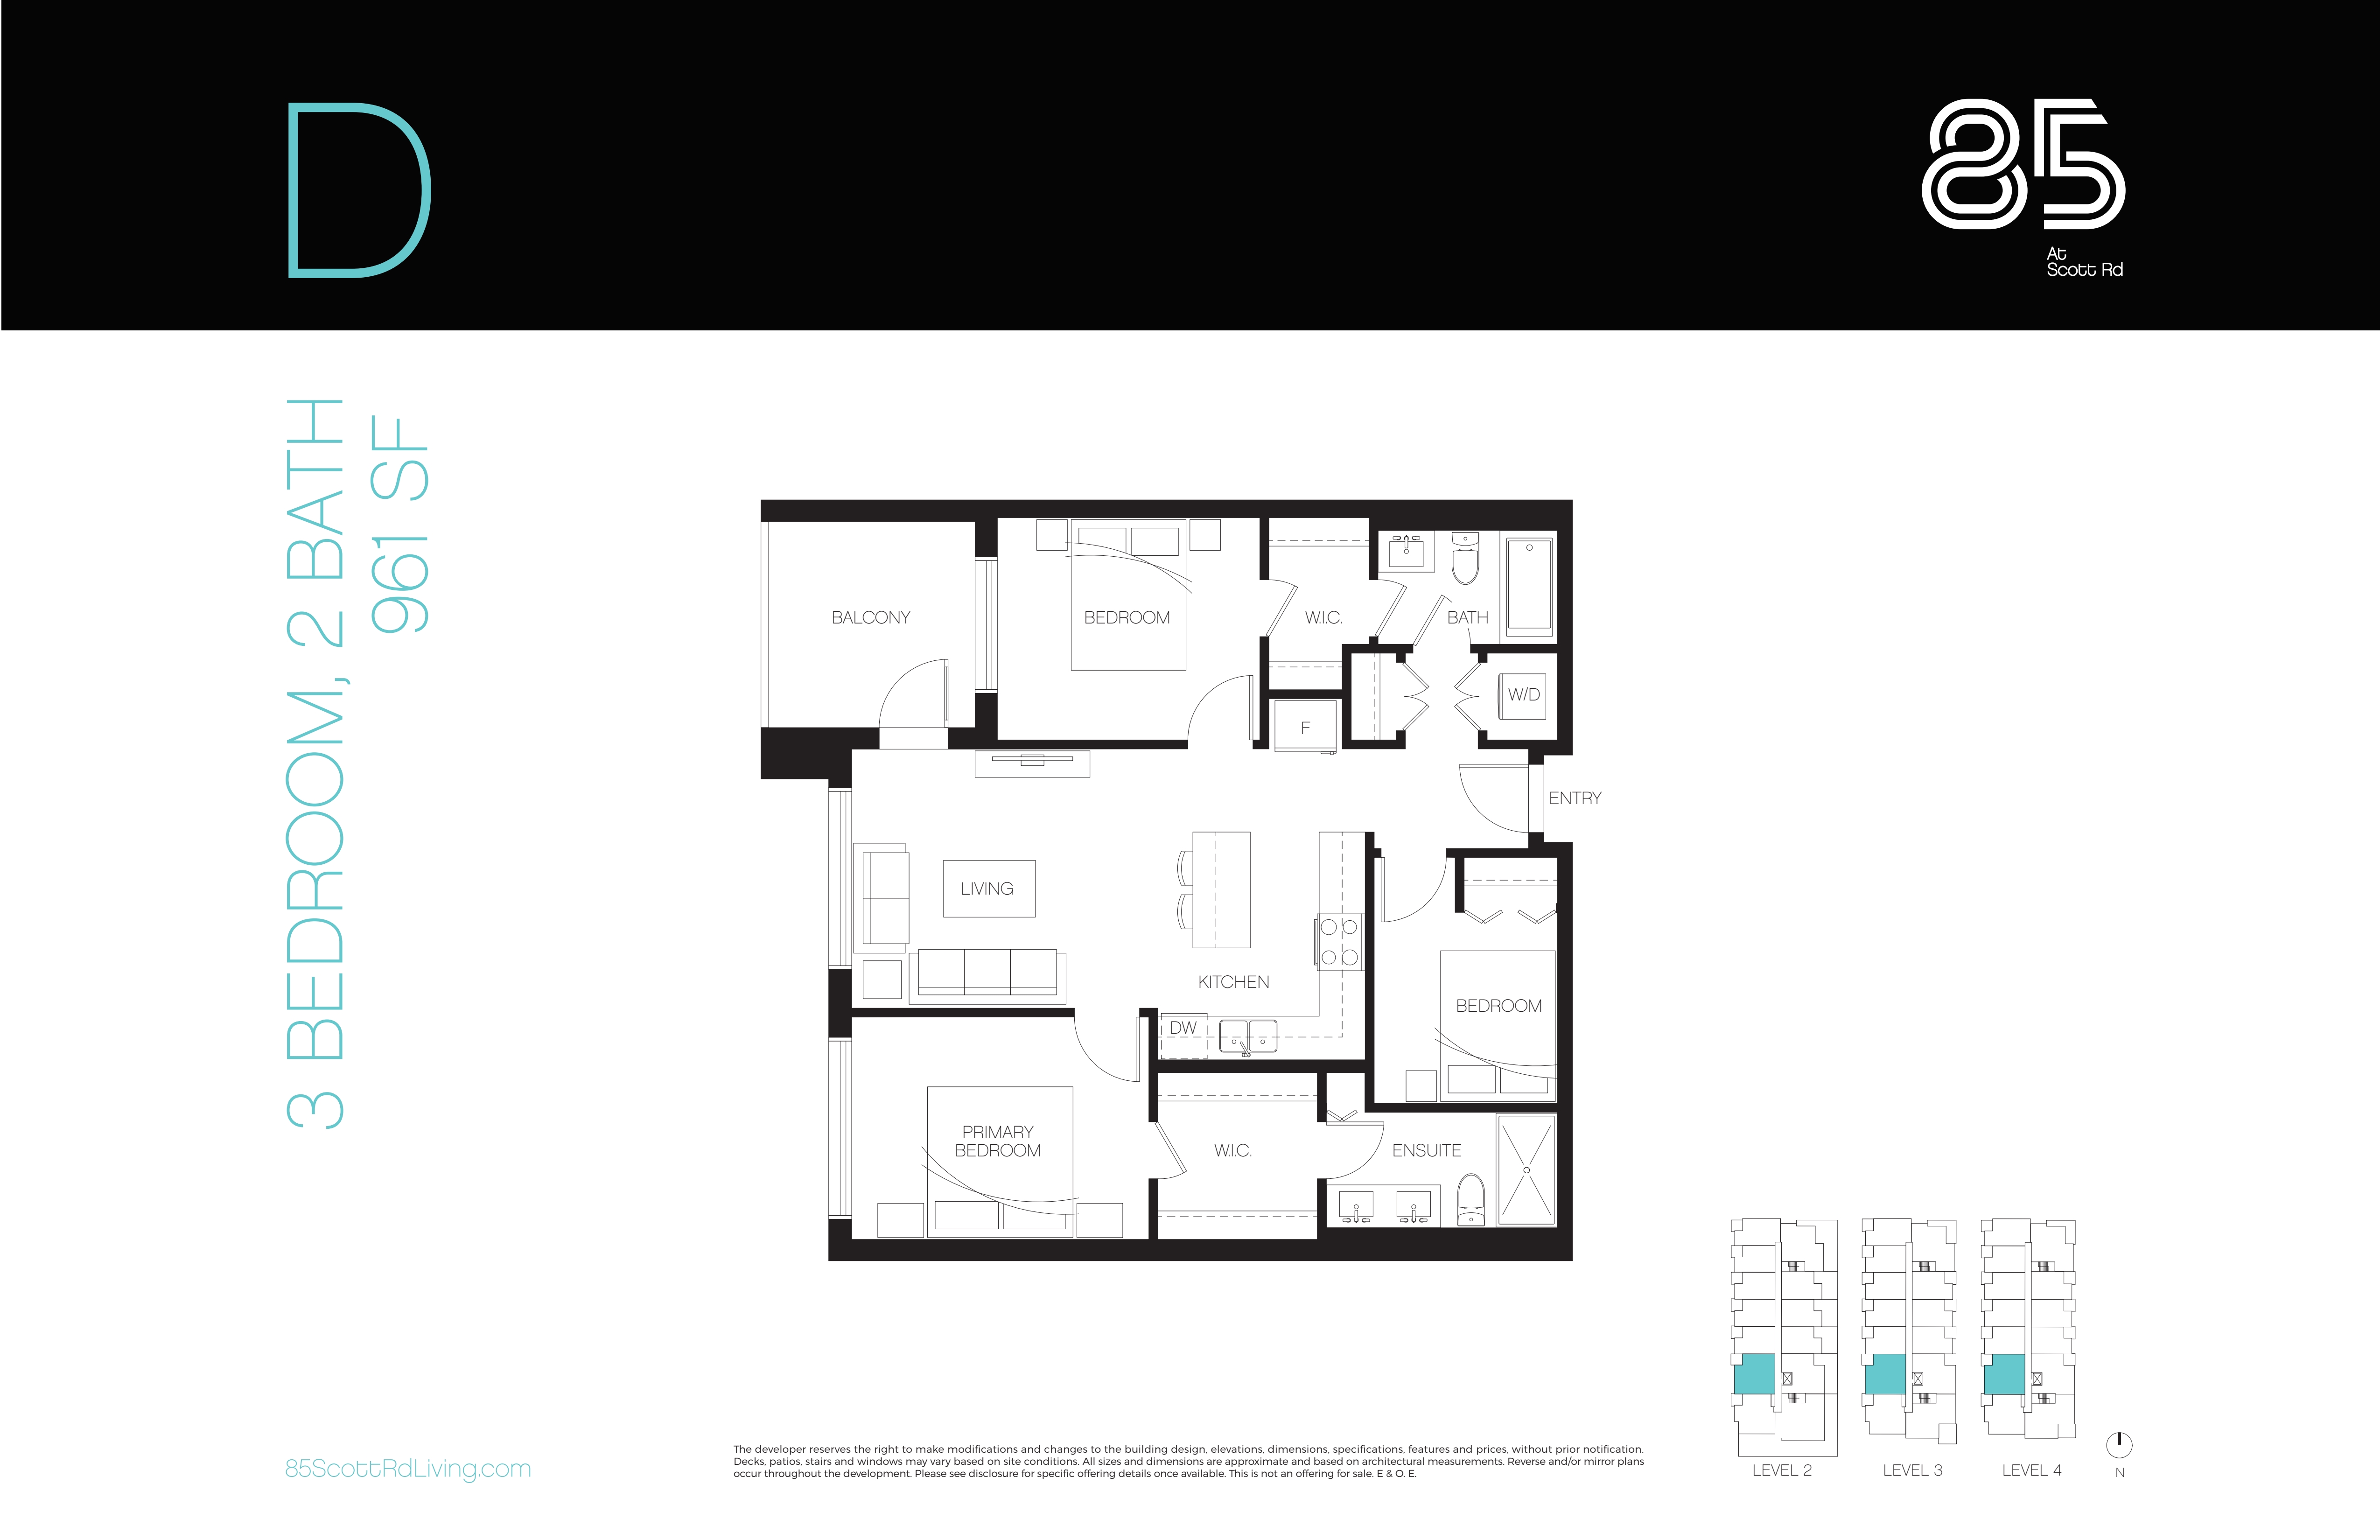 D Floor Plan of The 85 Condos with undefined beds